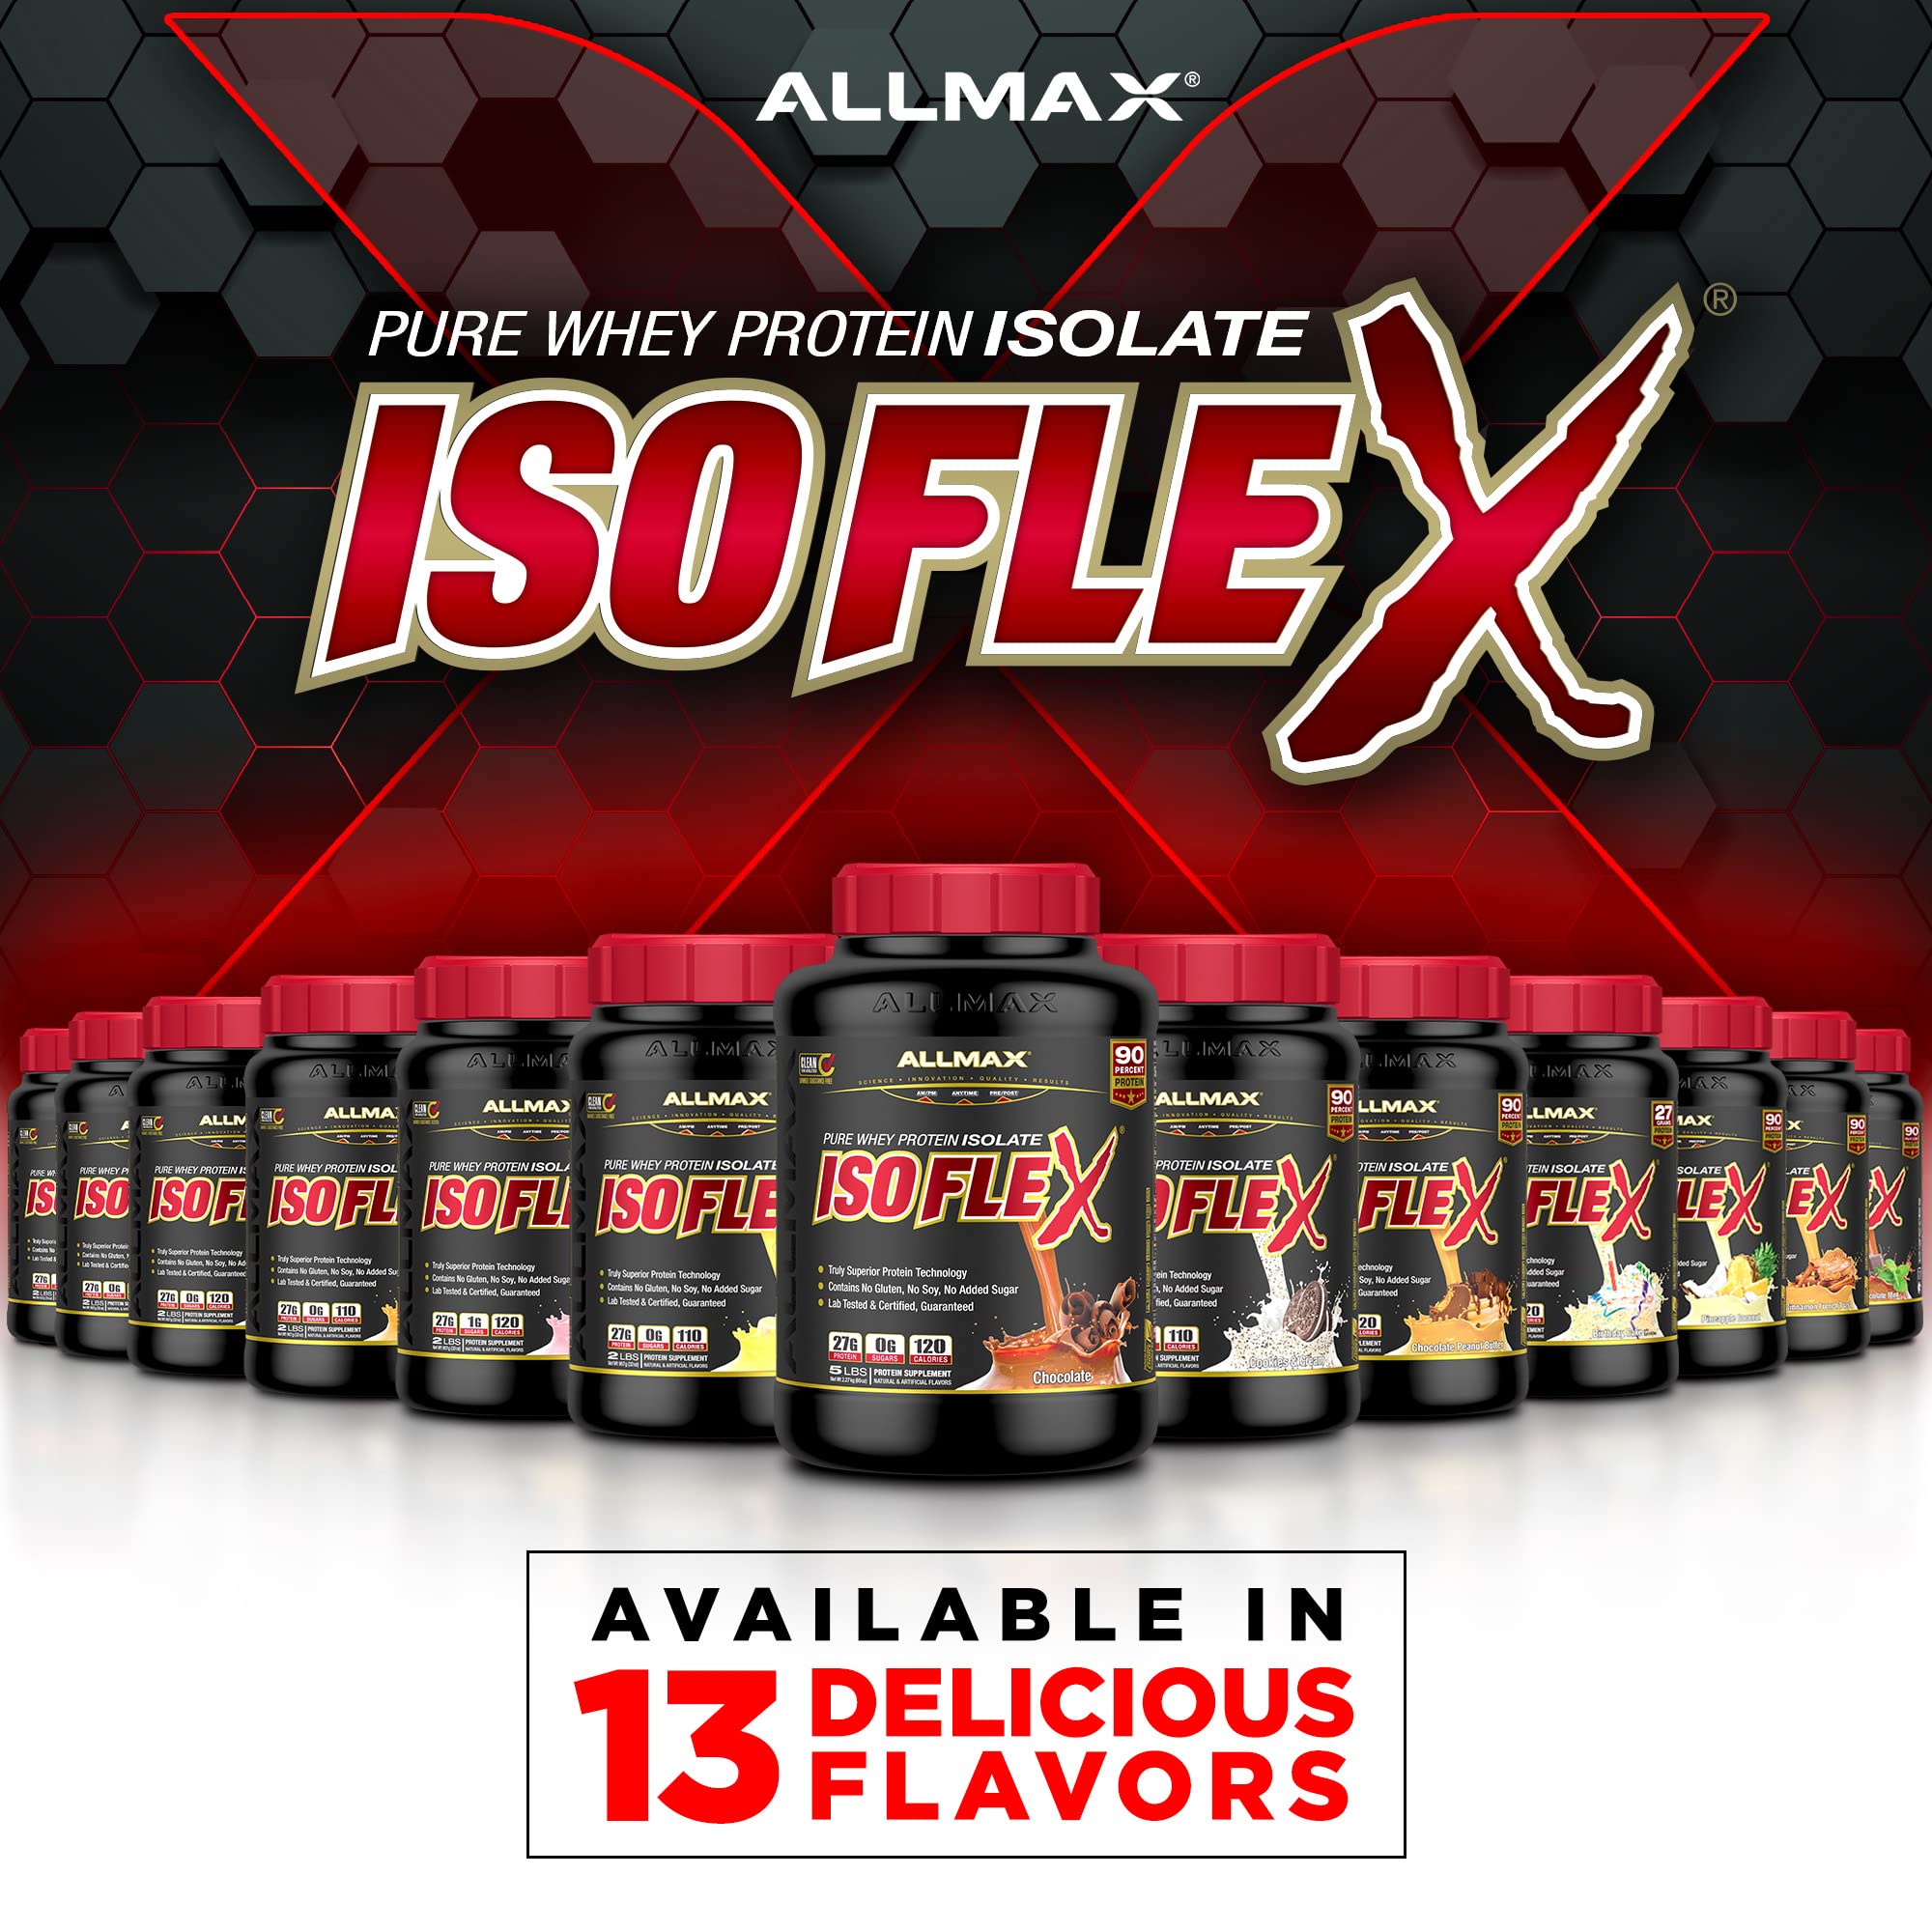 ALLMAX ISOFLEX Whey Protein Isolate, Chocolate Peanut Butter - 5 lb - 27 Grams of Protein Per Scoop - Zero Fat & Sugar - 99% Lactose Free - Gluten Free & Soy Free - Approx. 75 Servings